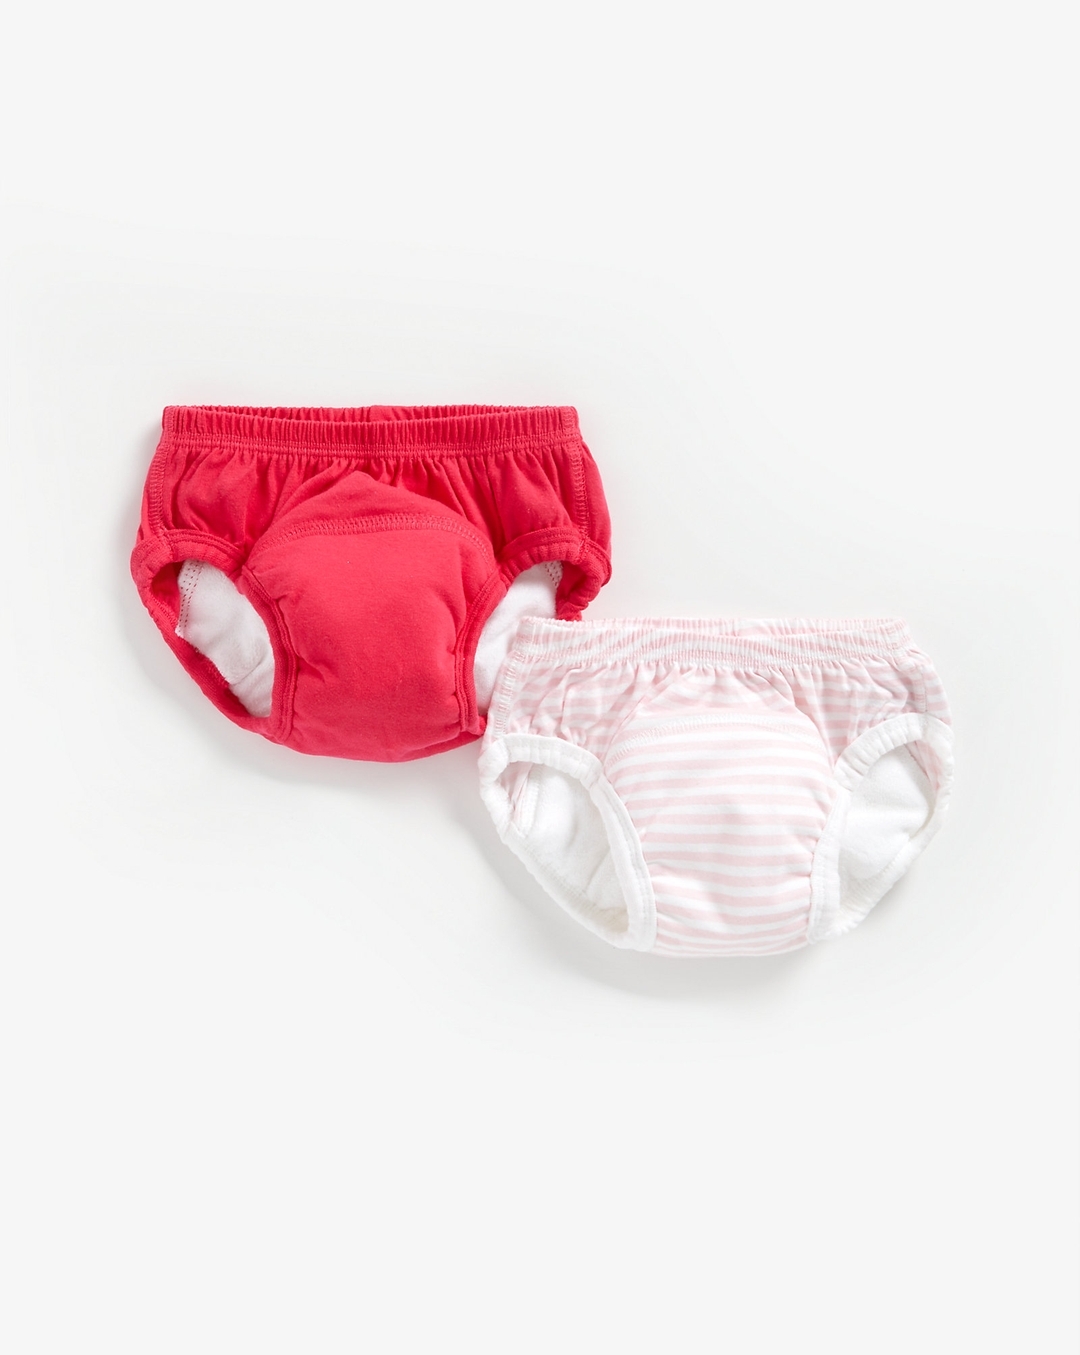 Diaper Pants  Potty Training Underwear by SuperBottoms